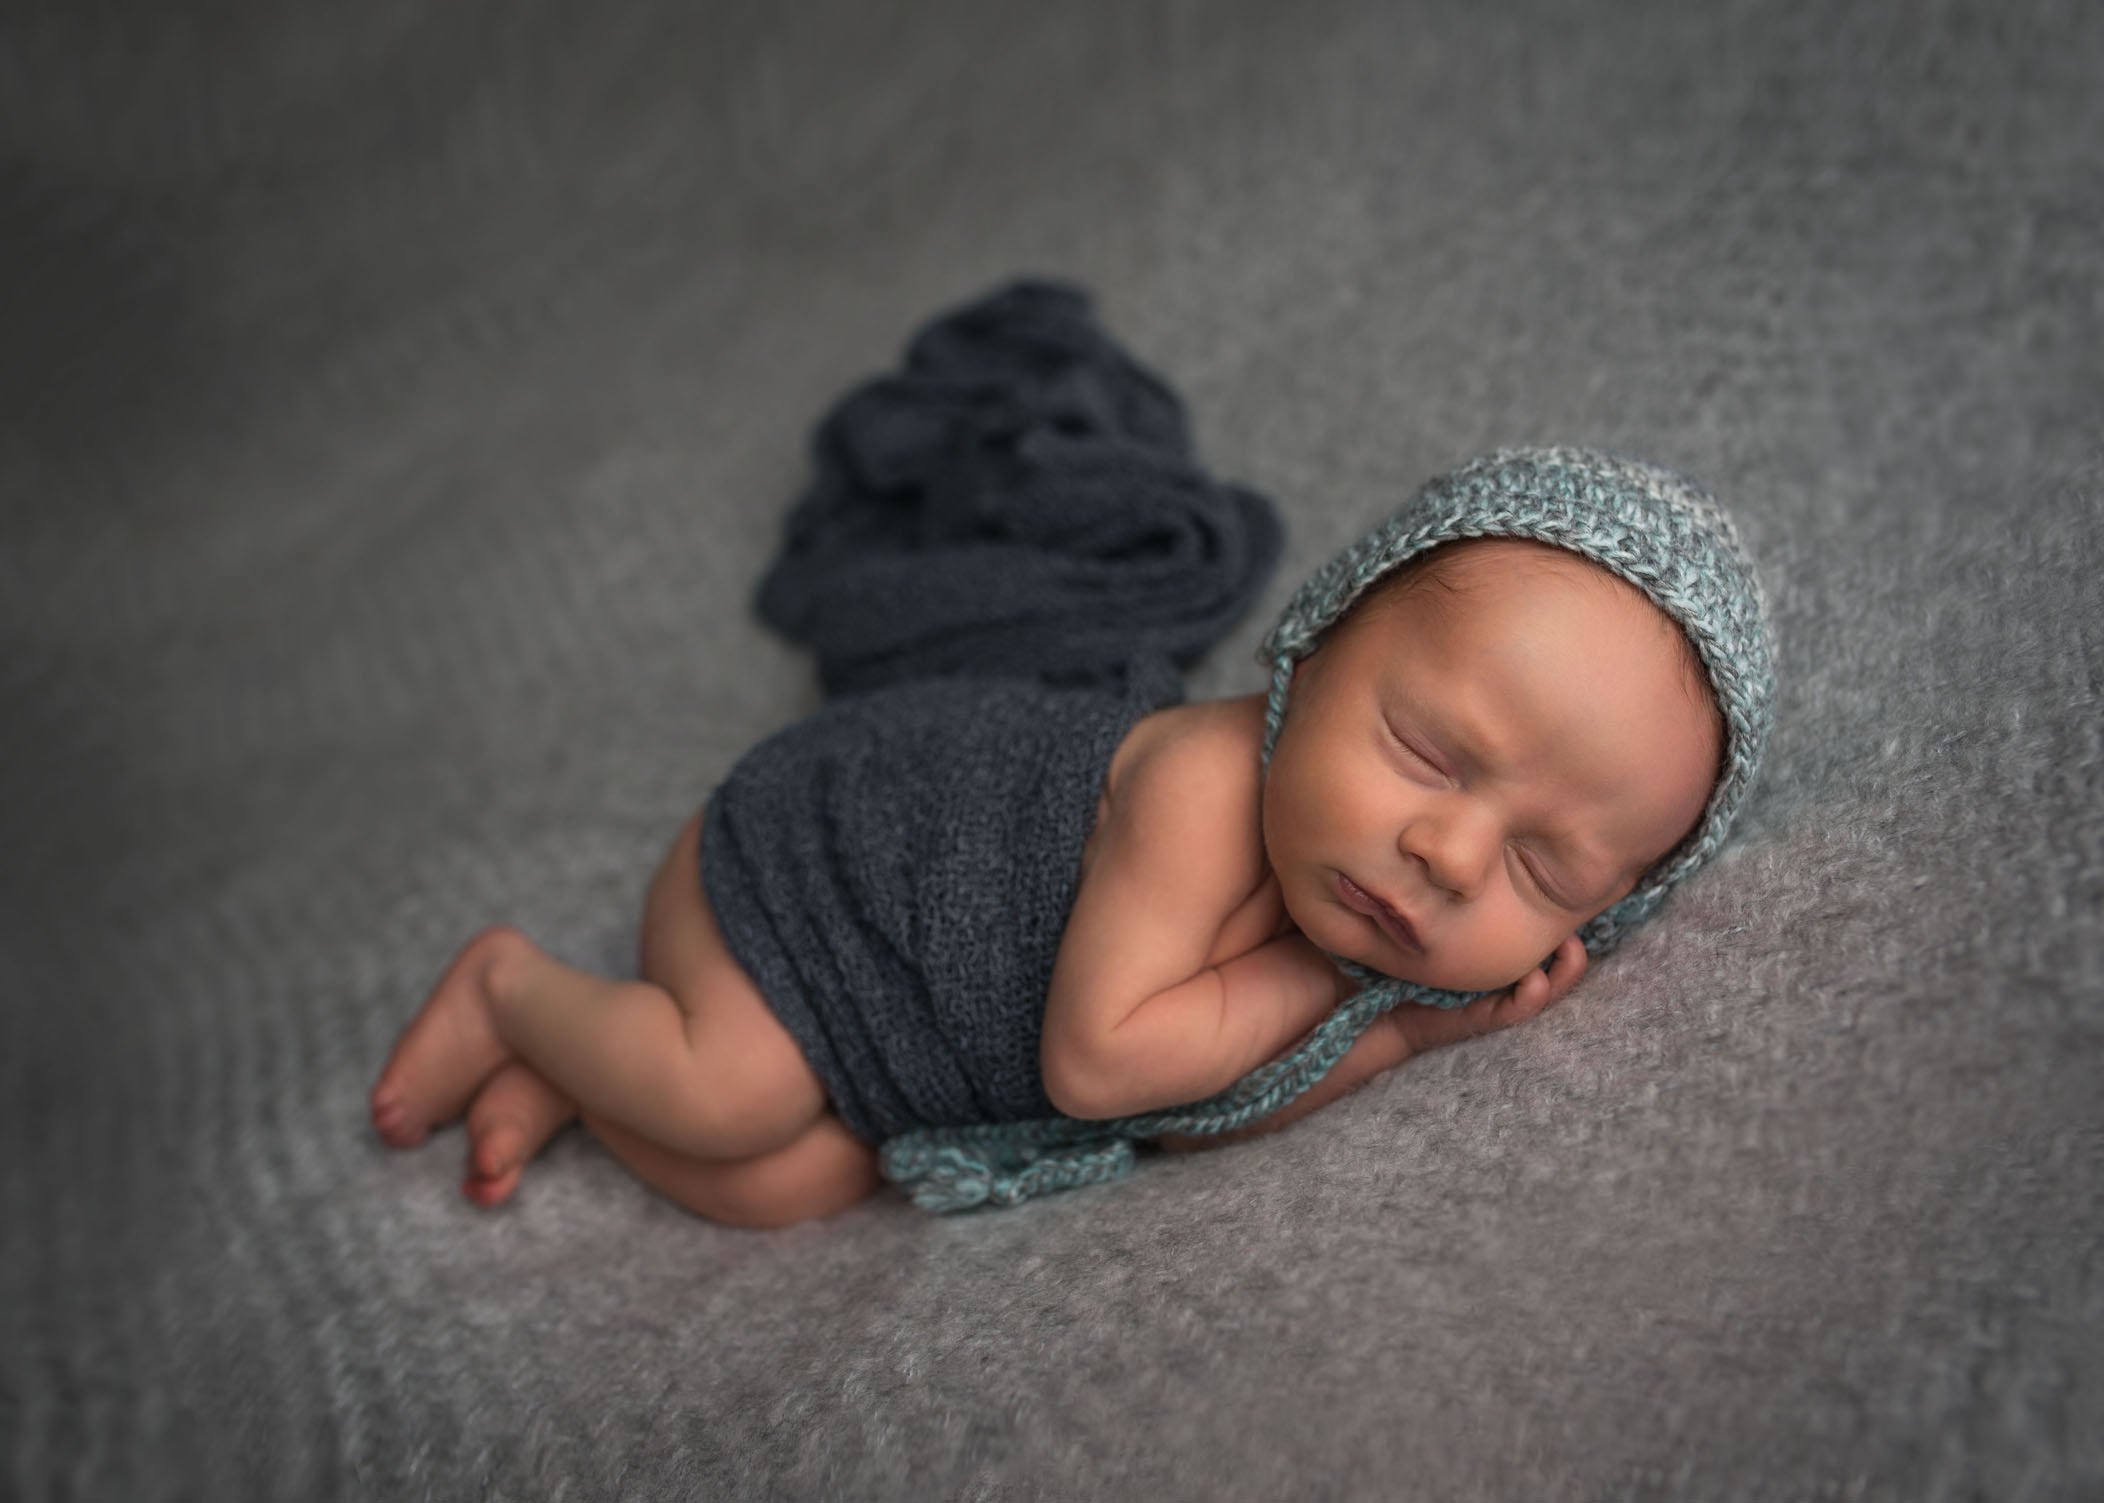 newborn sleeping on his side with cap and wrap on One Big Happy Photo